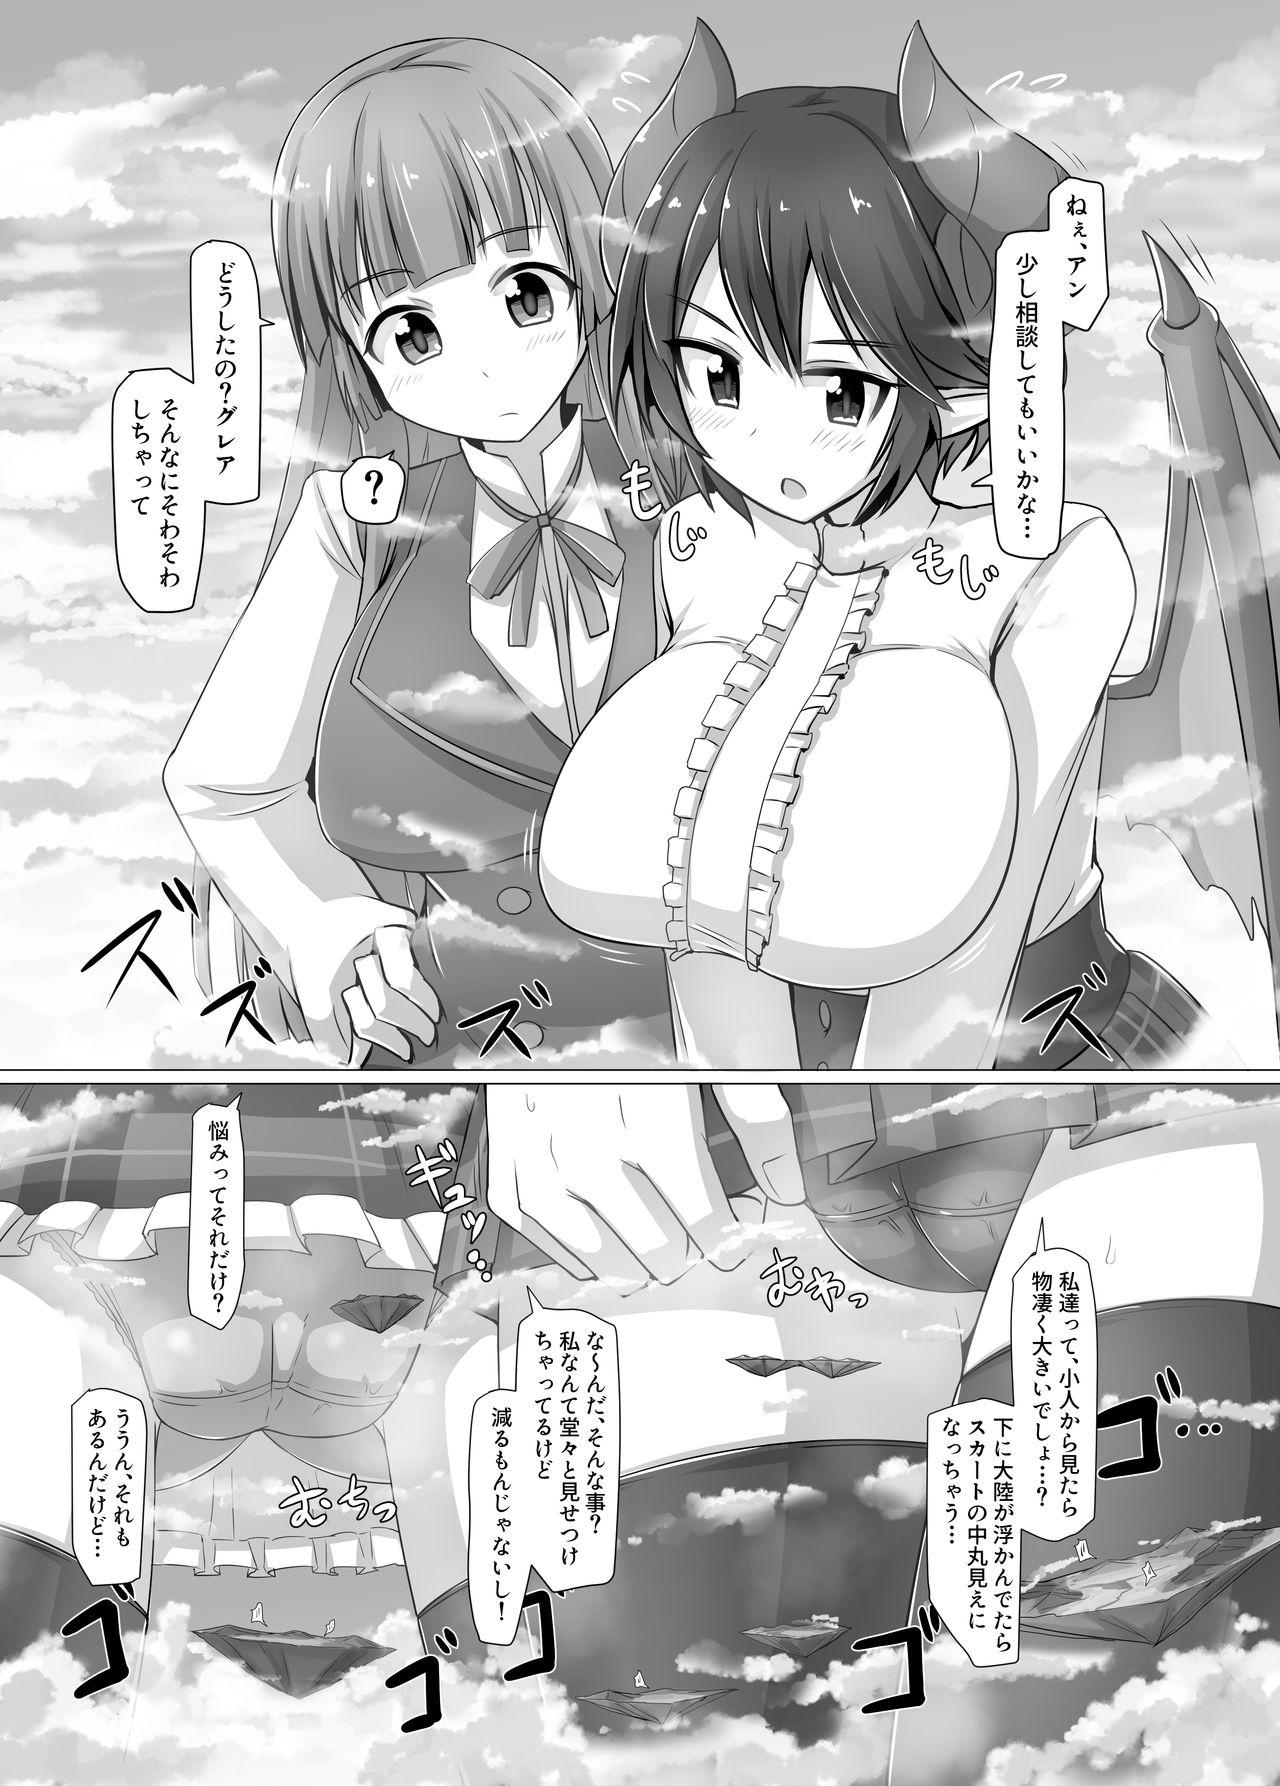 Reverse Cowgirl Gigantic Gas Situation - Rage of bahamut Manaria friends Horny Sluts - Page 2